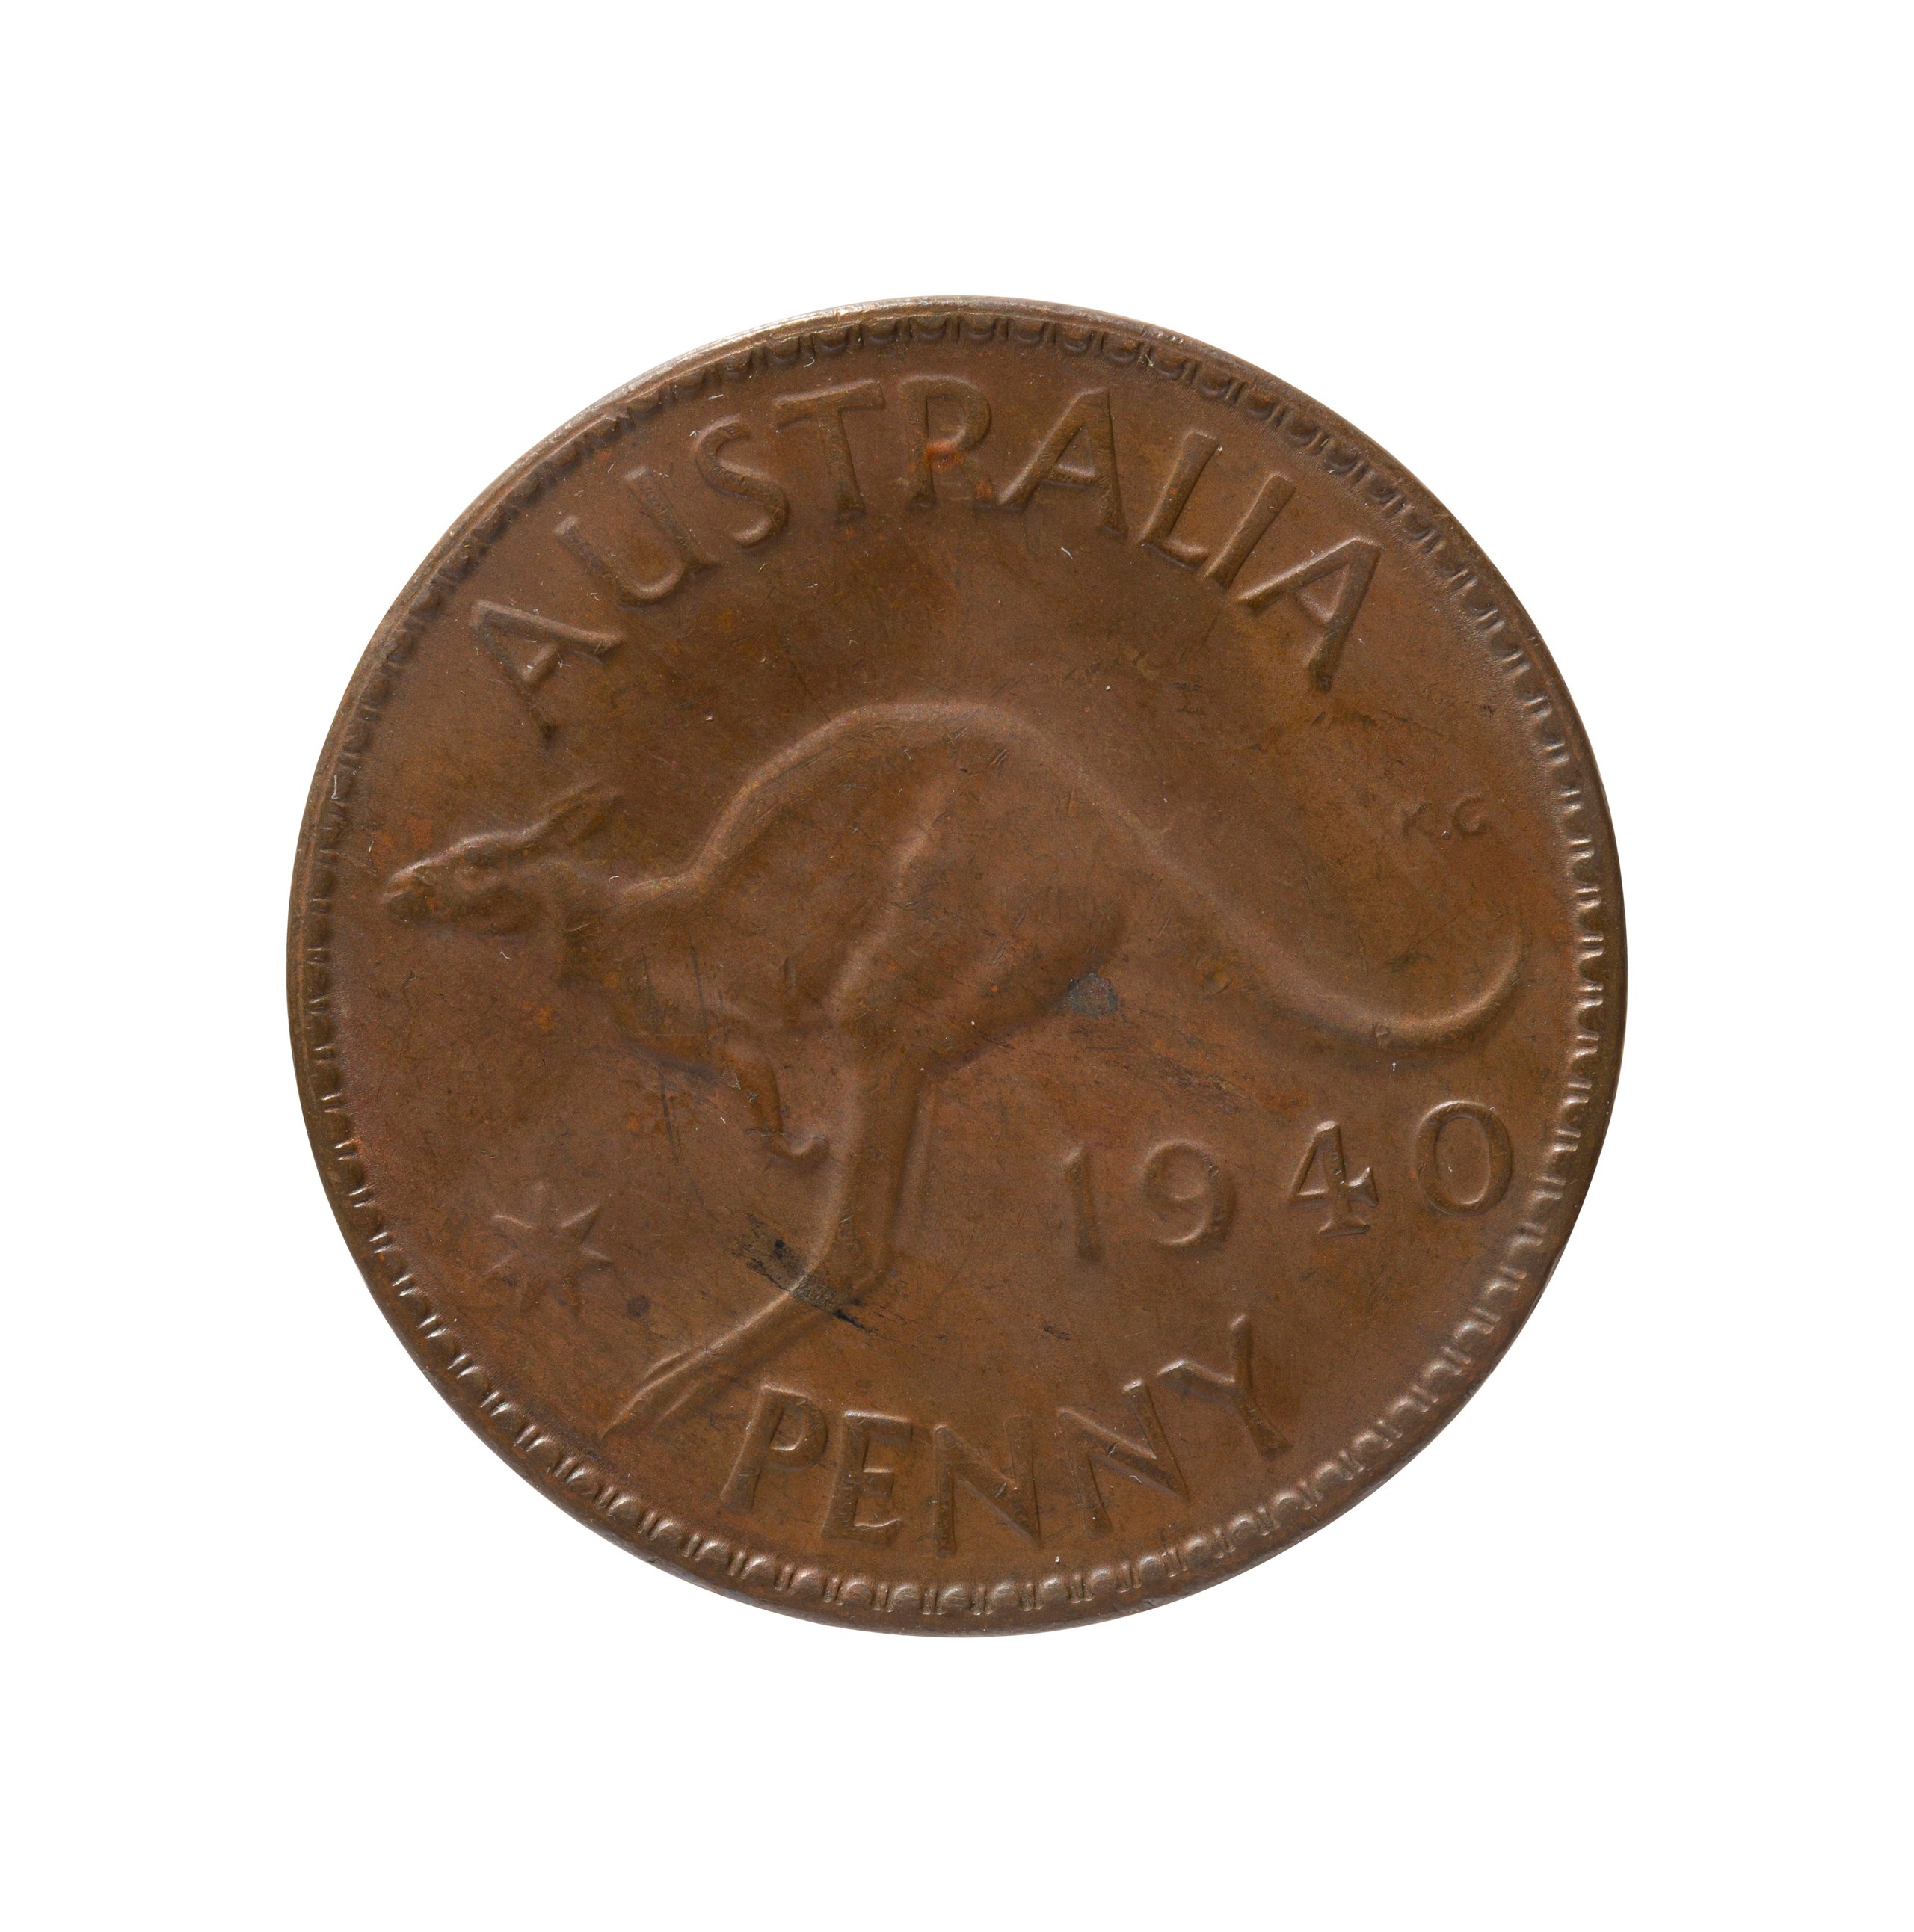 Australian 'King George' Penny coin